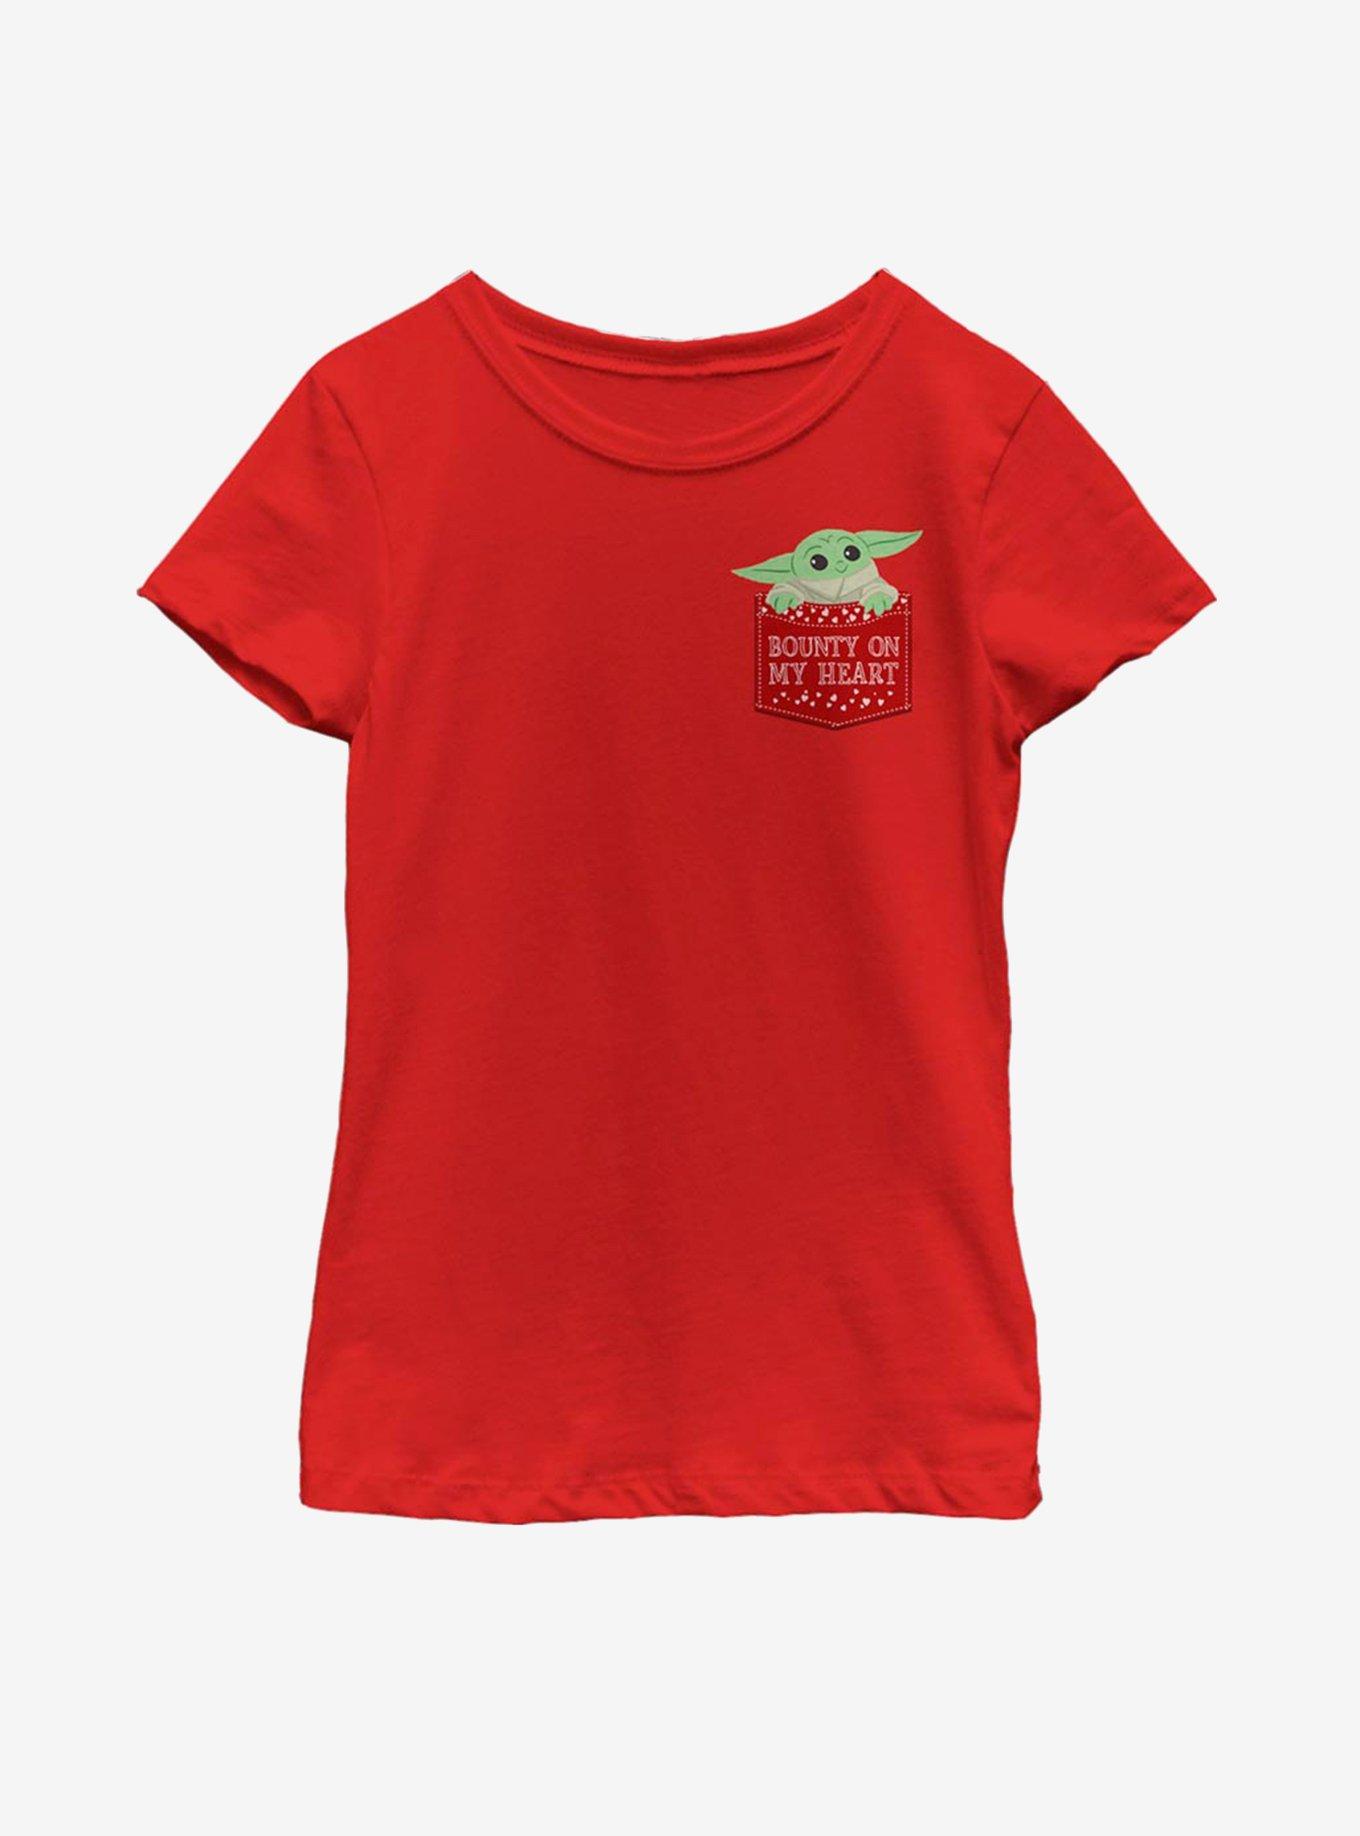 Star Wars The Mandalorian The Child Bounty On My Heart Faux Pocket Youth Girls T-Shirt, RED, hi-res